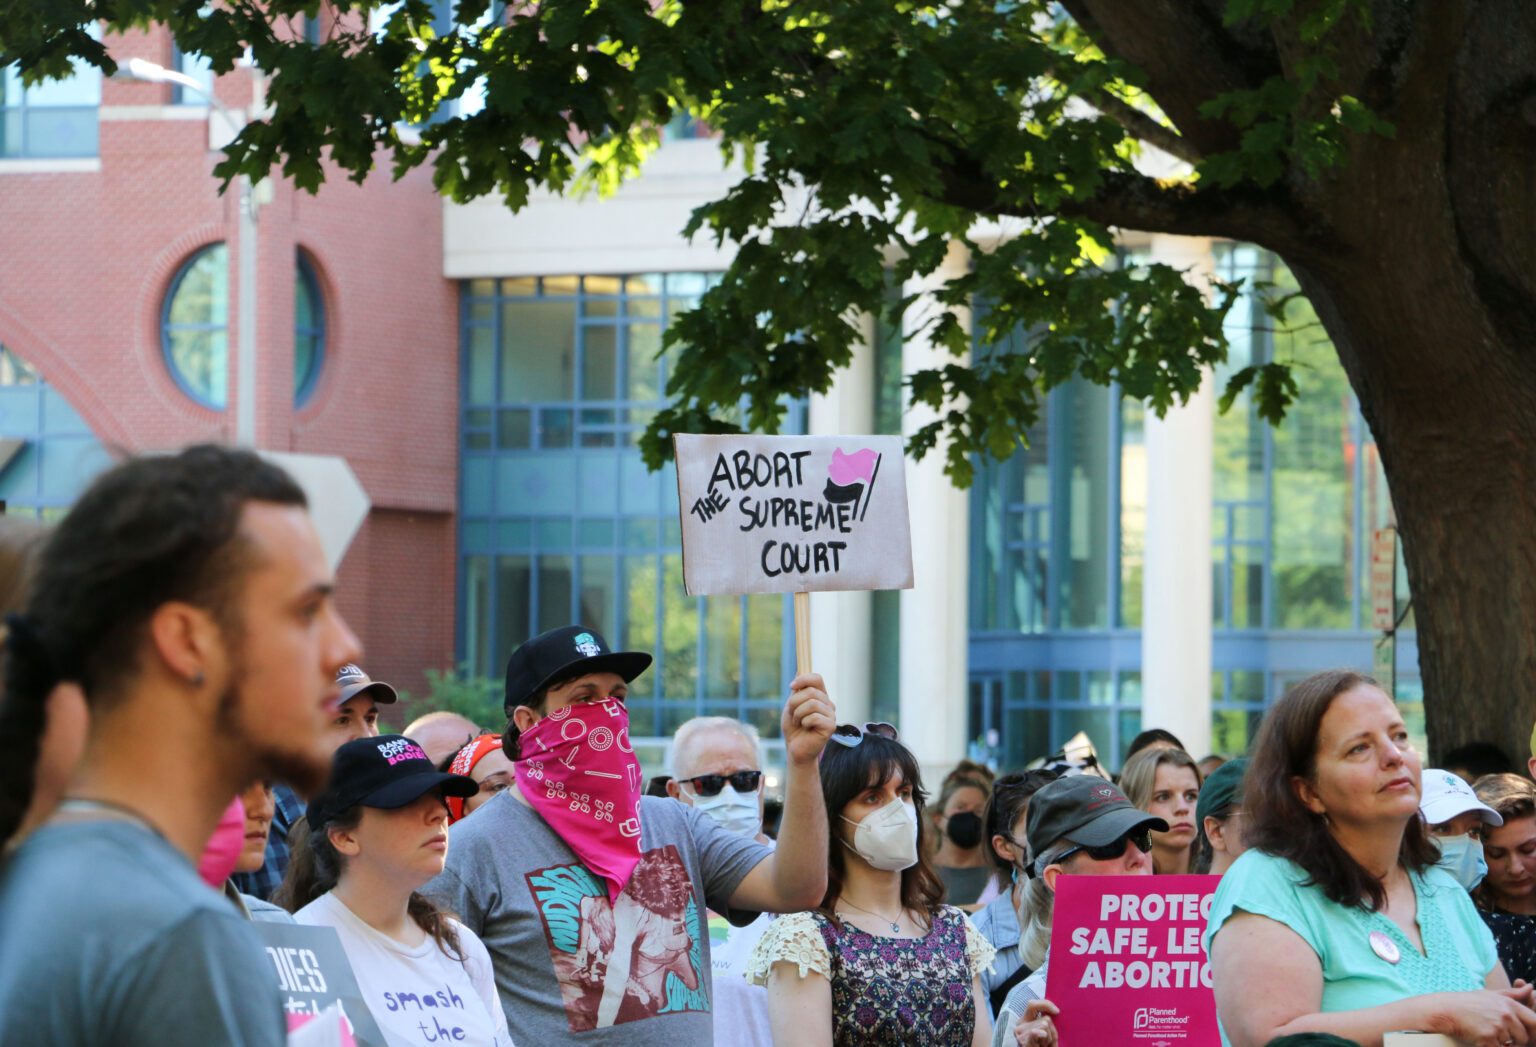 Hundreds gathered outside Bellingham City Hall for a Bans Off Our Bodies rally following the U.S. Supreme Court's overturn of Roe v. Wade on June 24. Mt. Baker Planned Parenthood and Indivisible Bellingham organized the Friday evening rally